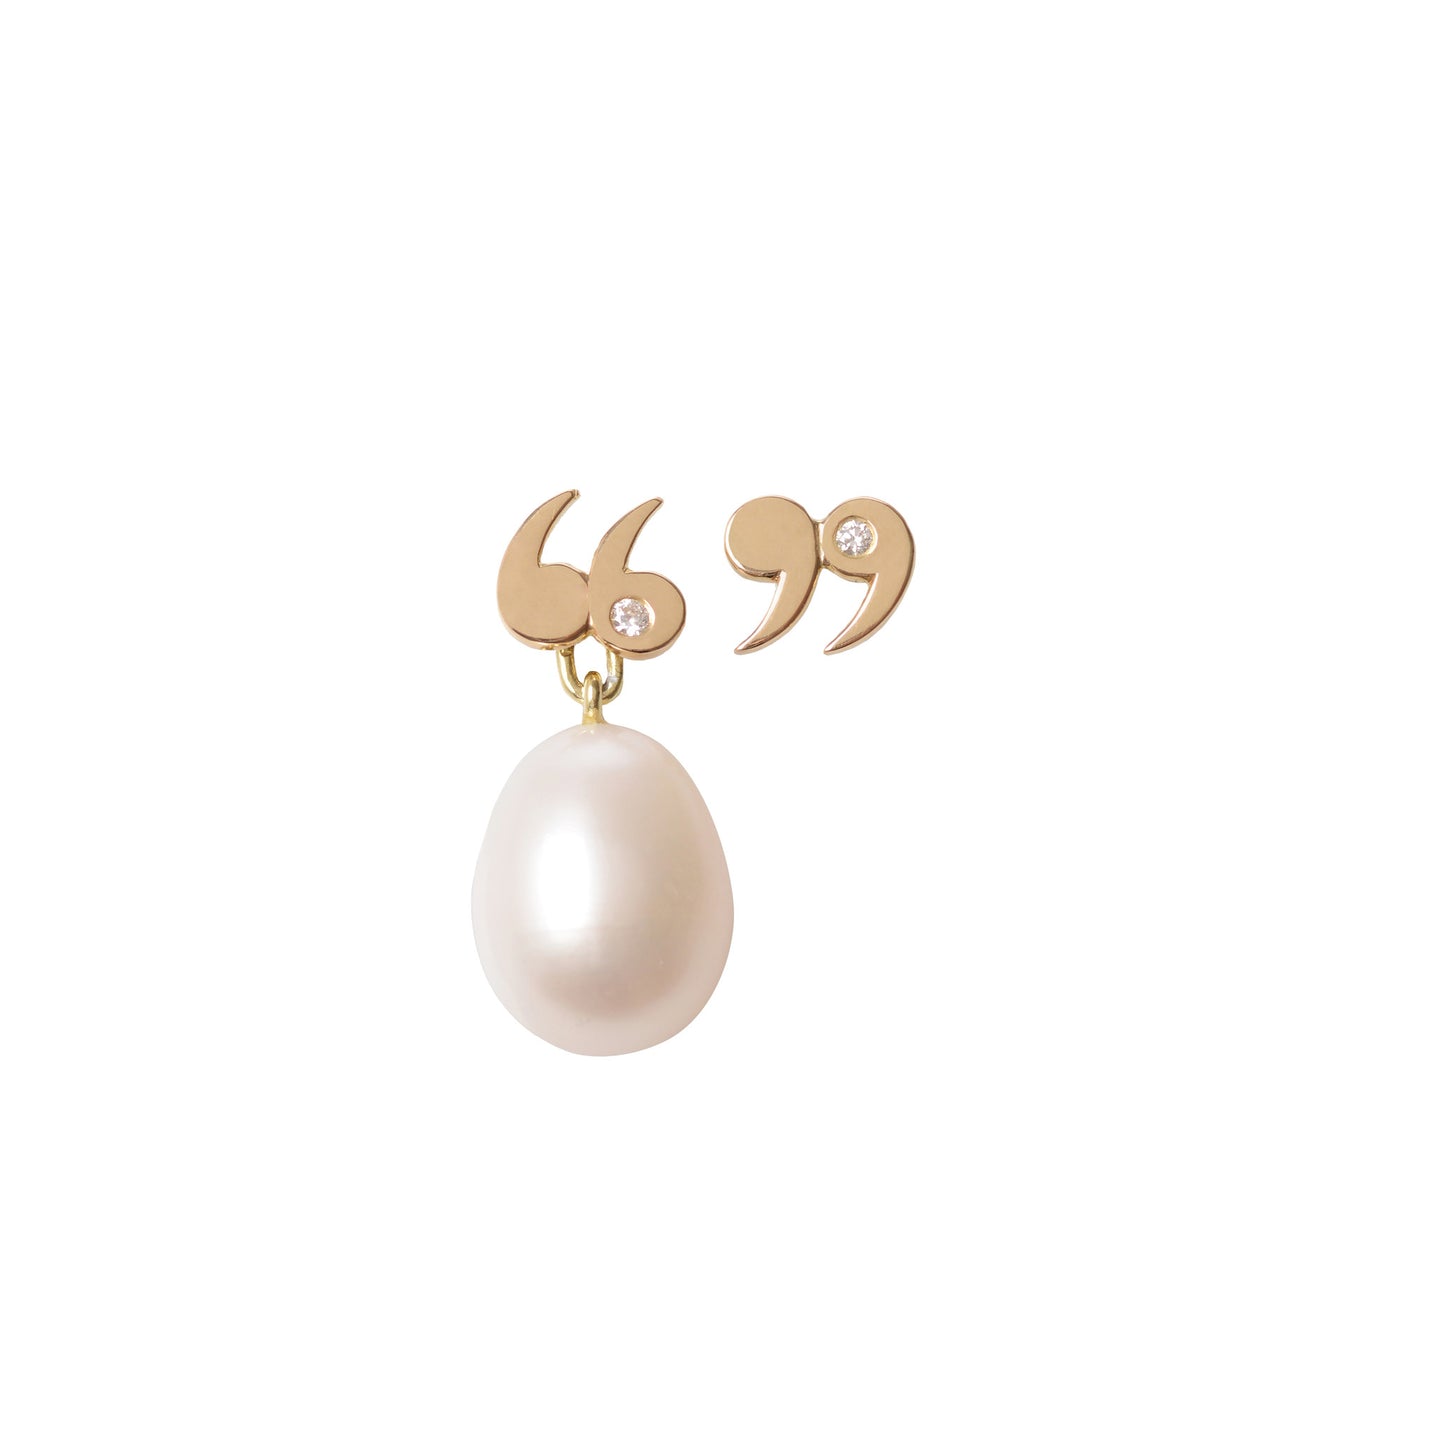 Diamond Accented Quote Un-Quote Earrings with Pearls one detached by McFarlane Fine Jewellery